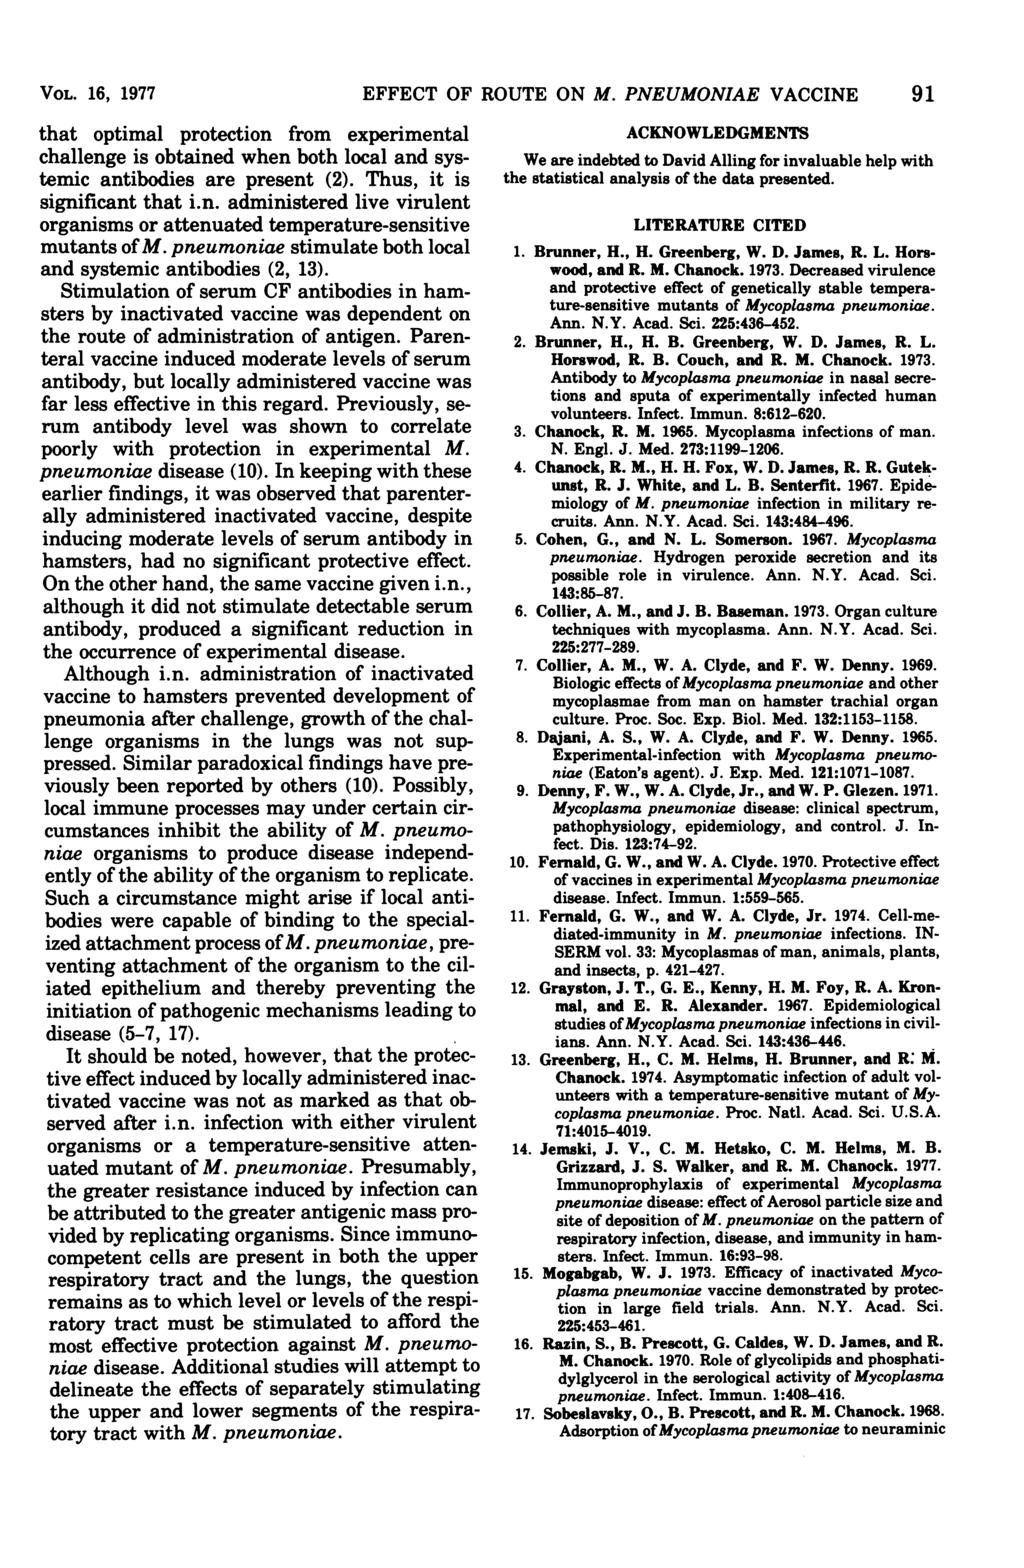 VOL. 16, 1977 EFFECT OF ROUTE ON M. PNEUMONIAE VACCINE 91 that optimal protection from experimental challenge is obtained when both local and systemic antibodies are present (2).